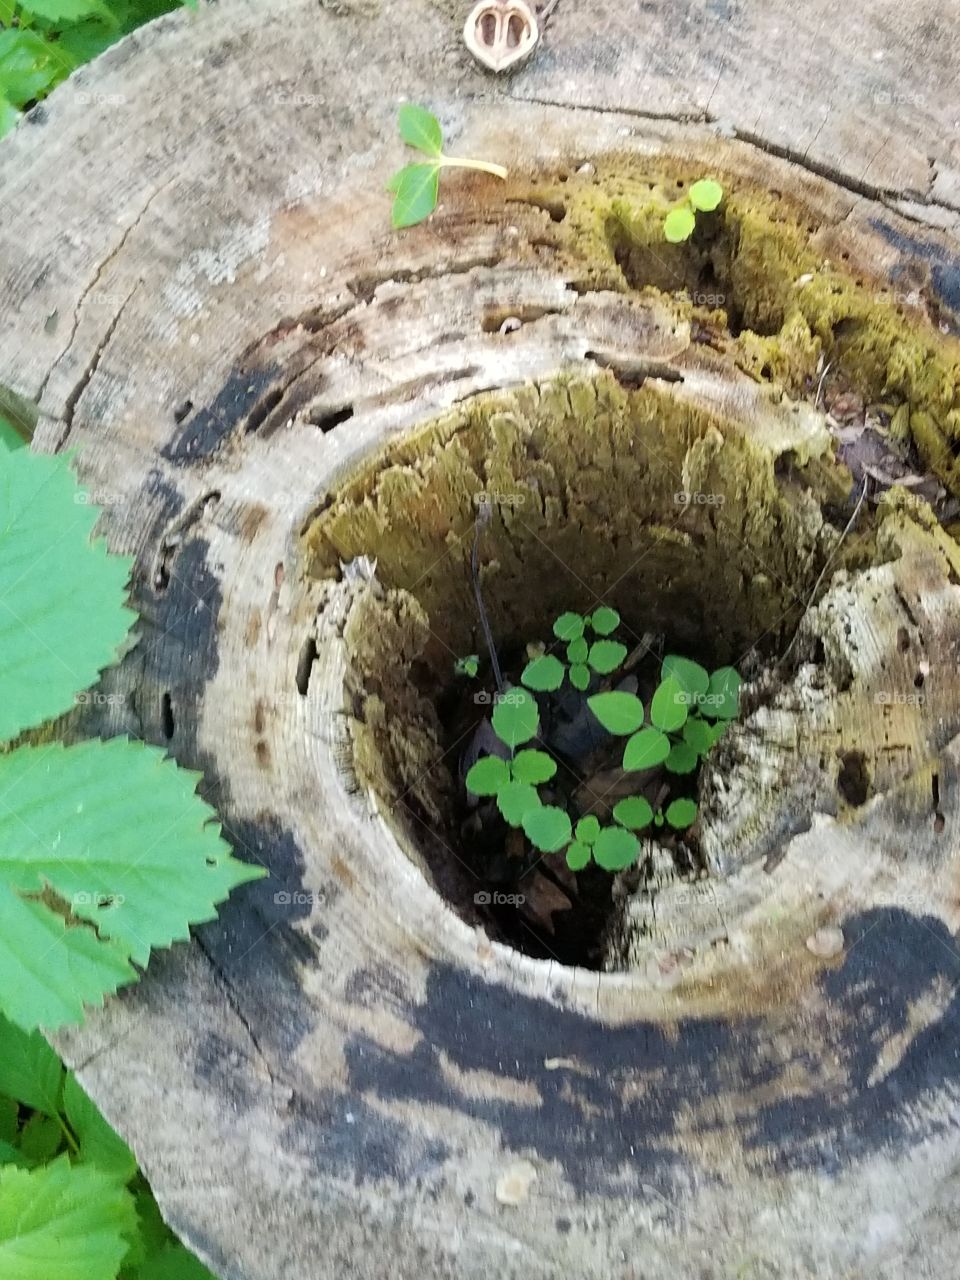 old stump with plants growing in it